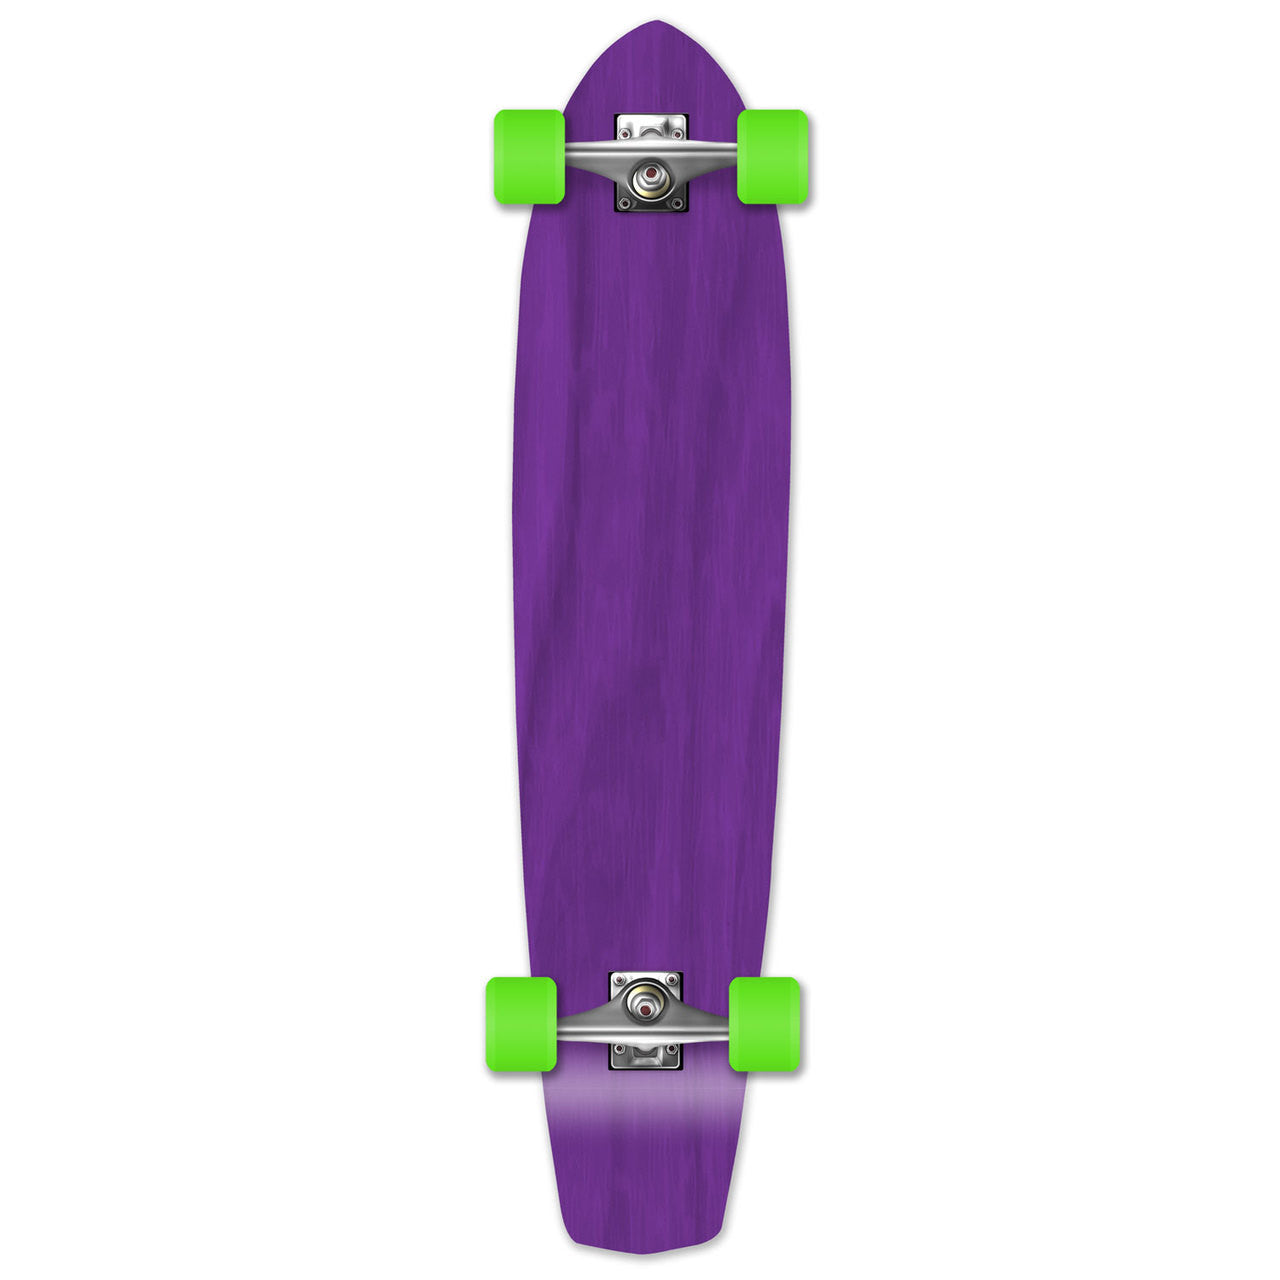 Yocaher Slimkick Longboard Complete - Stained Purple